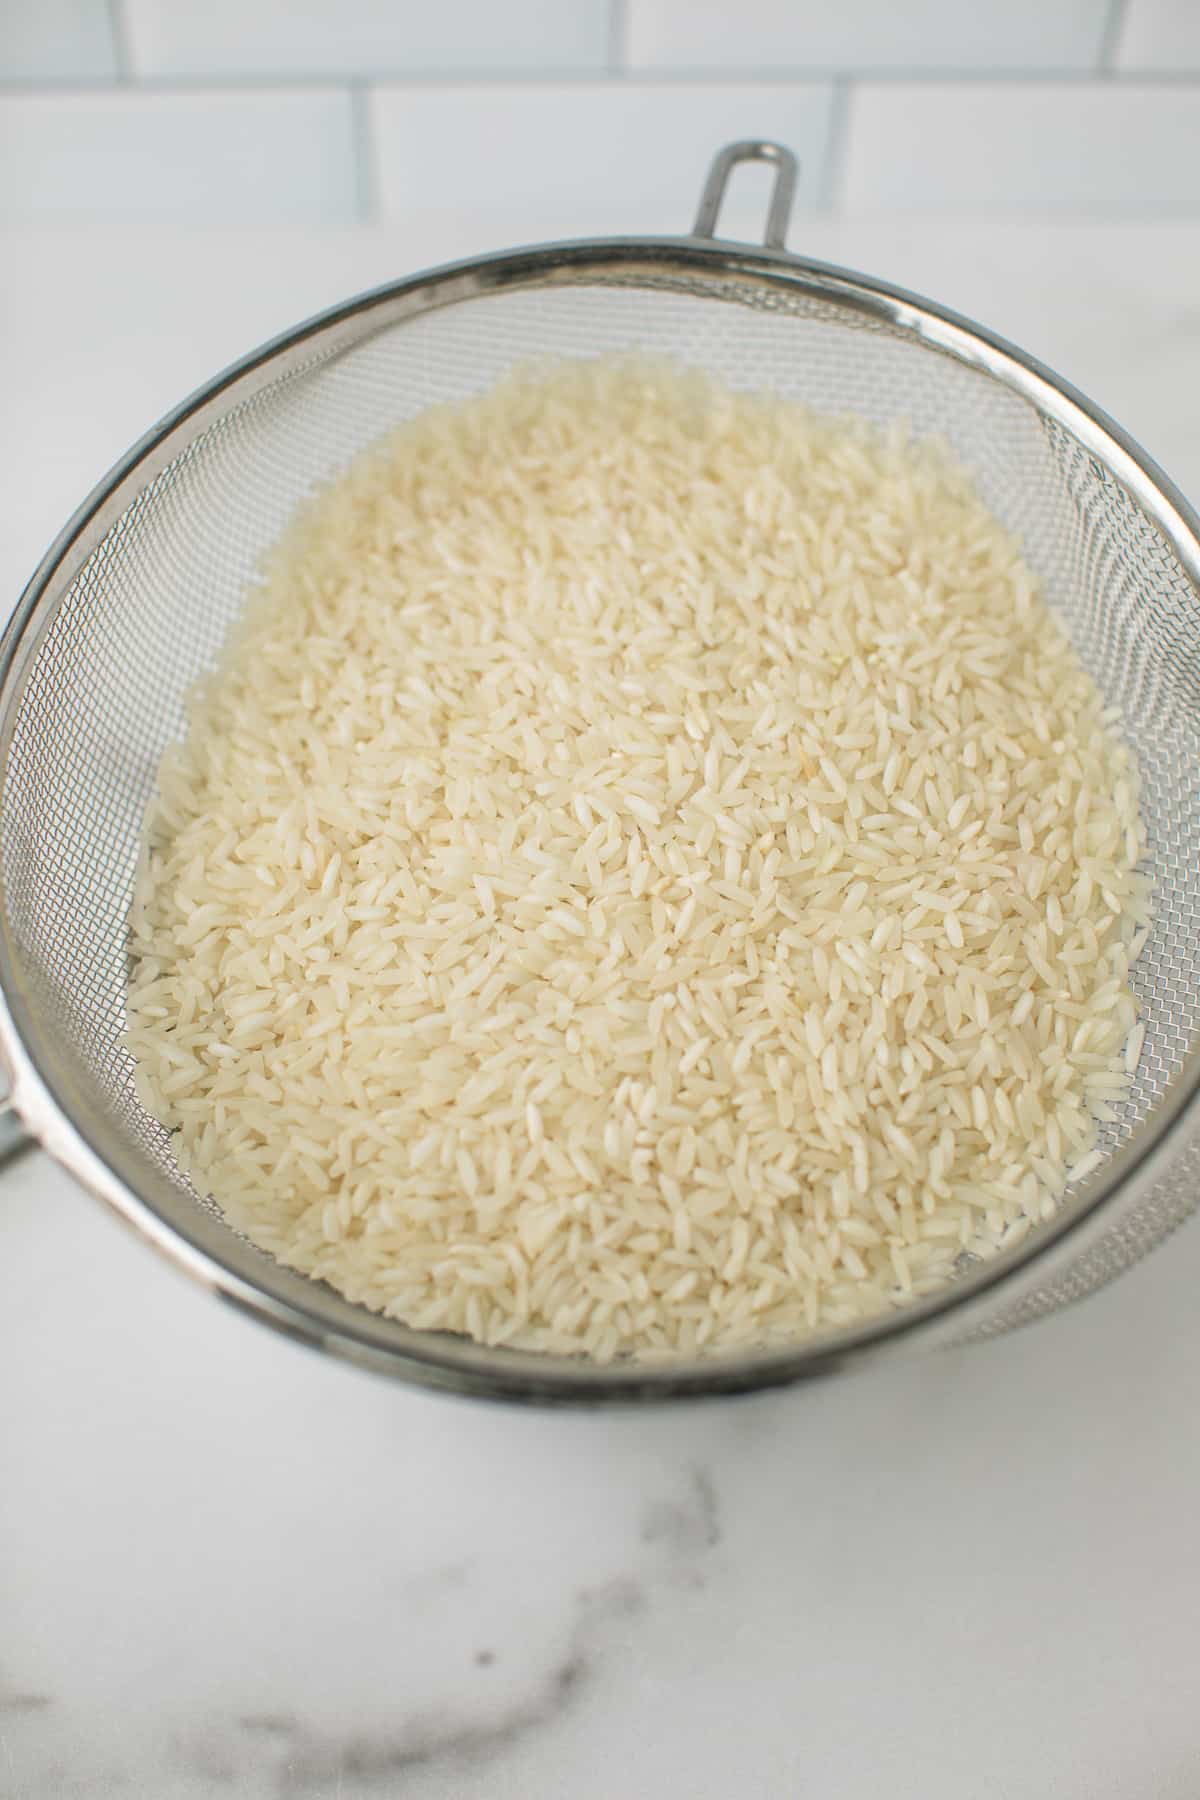 white rice in a fine mesh colander for rinsing.